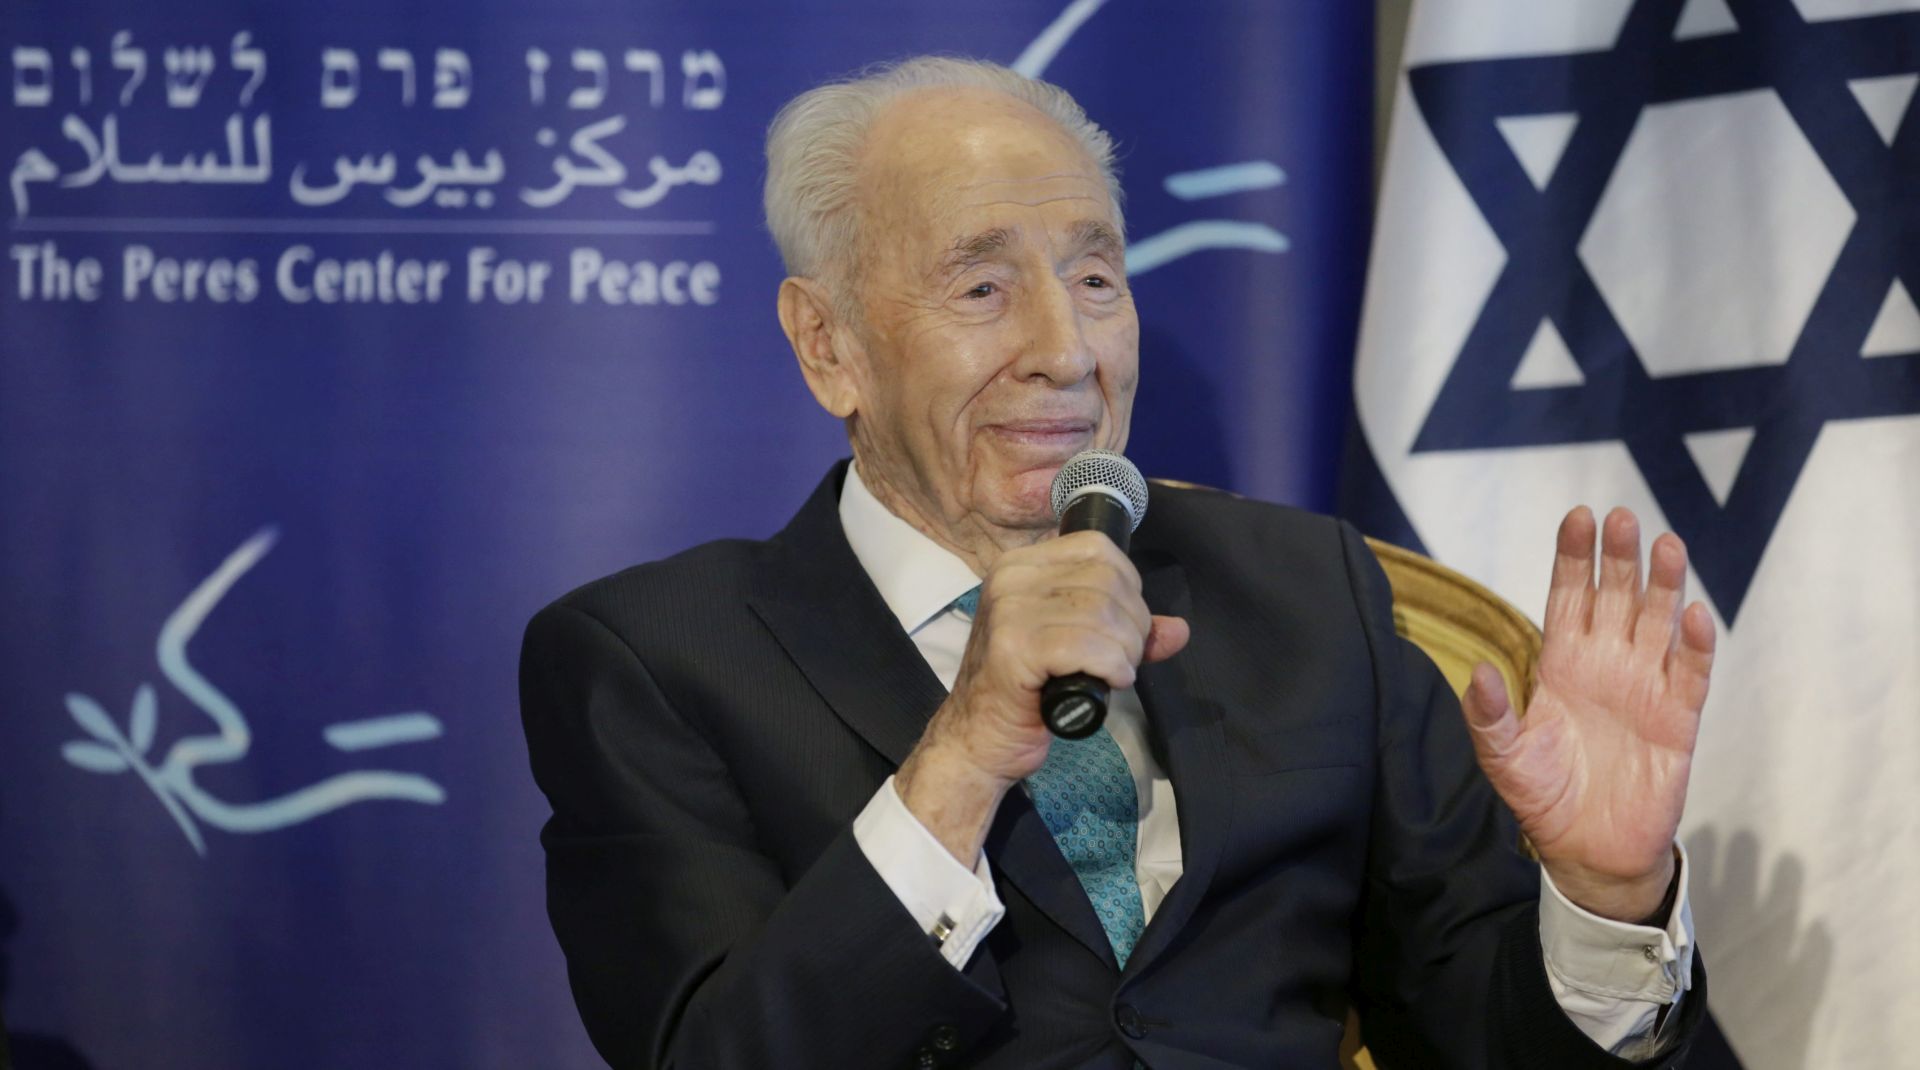 epa05558238 A photograph released on 27 September 2016 of Shimon Peres, Israel's elder statesman, former President and Prime Minister, in a photograph from 27 June 2016, during an event in The Peres Center for Peace in Jaffa, Israel. According to reports from the hospital in Tel Aviv where Peres has been treated since suffering a stroke on 14 September Peres' condition has dramatically worsened on 27 September 2016. His personal physician and son-in-law, Dr. Rafi Walden said he fears Peres' vital organs could shut down and said on 27 September 2016 his condition was 'extremely serious.'  EPA/JIM HOLLANDER